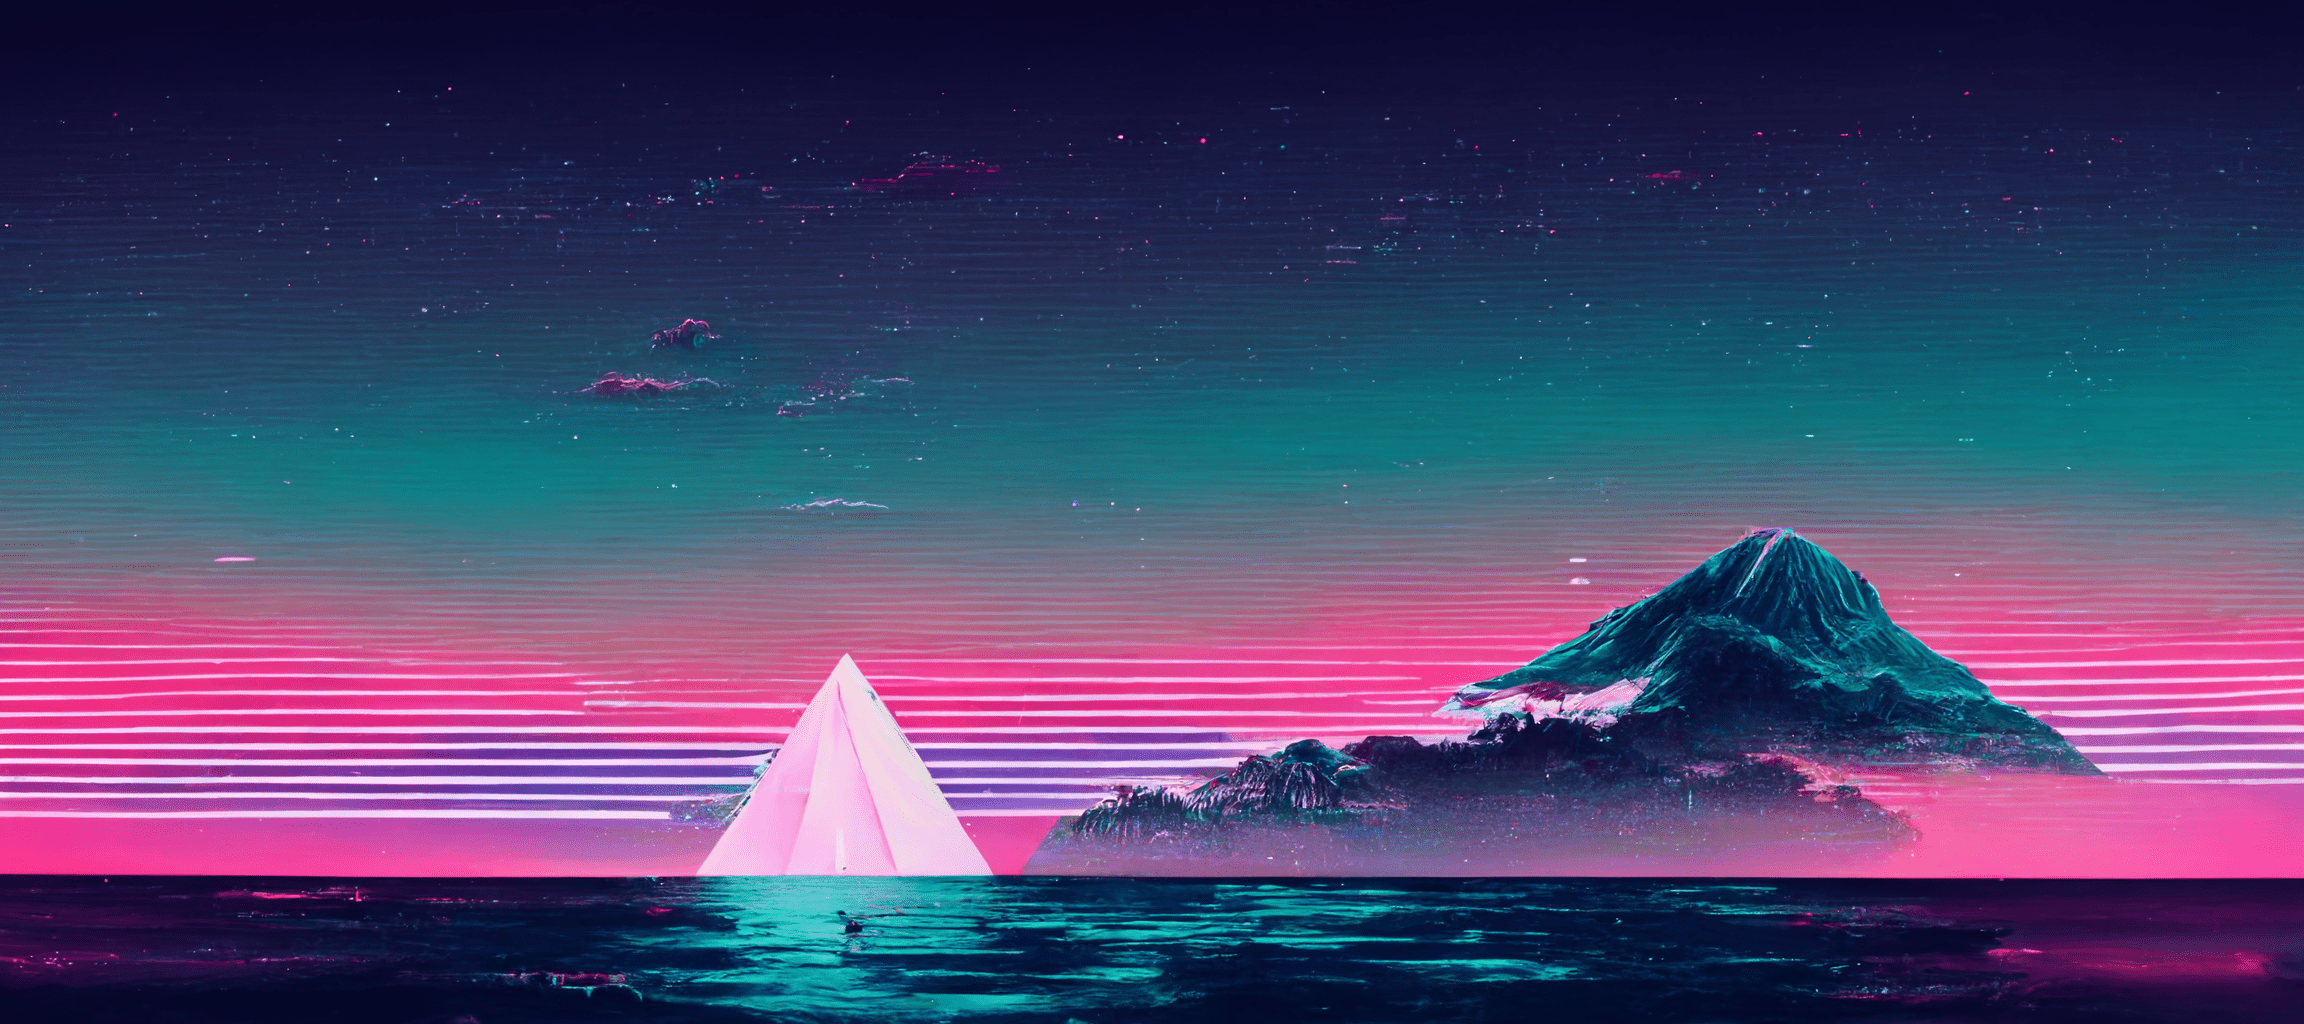 A neon mountain and pyramid island in the sea - Vaporwave